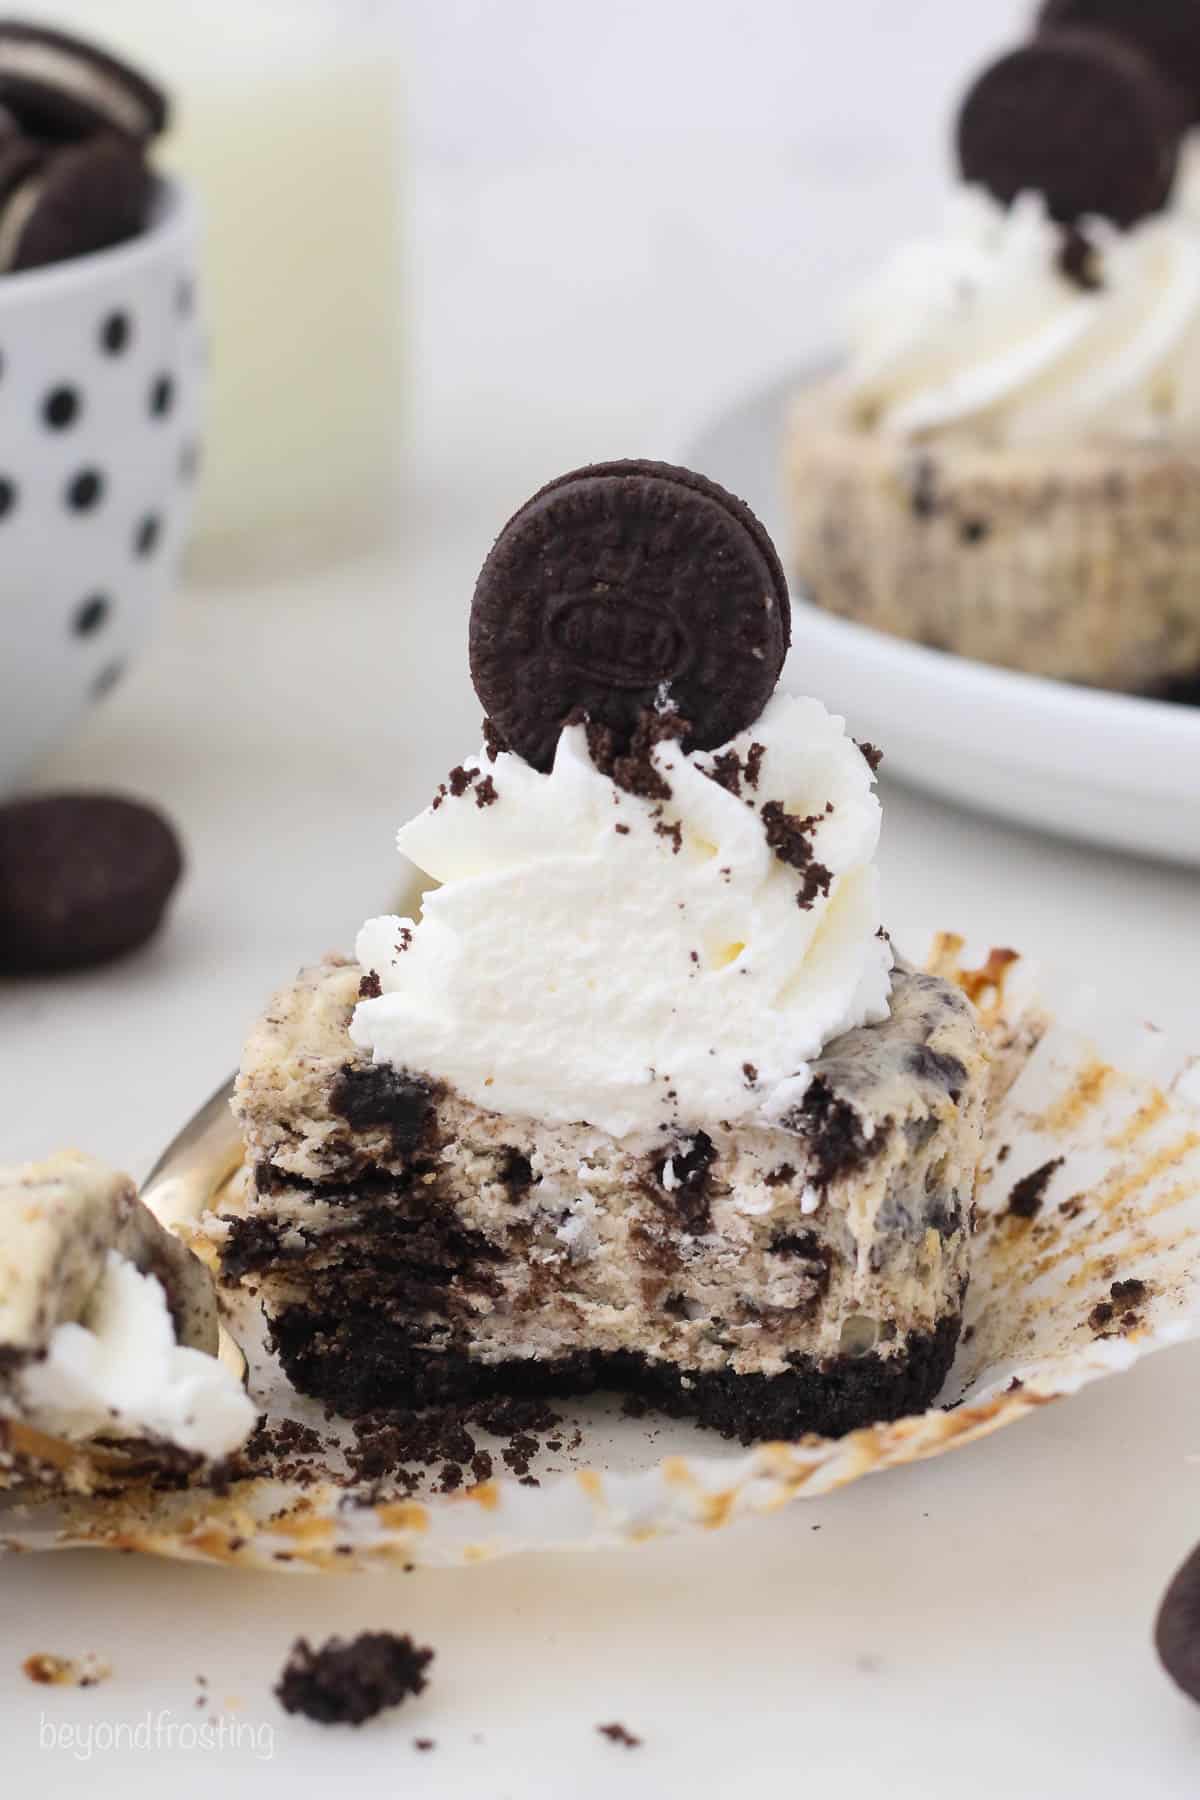 A mini Oreo cheesecake cut in half with a bowl of Oreo cookies behind it